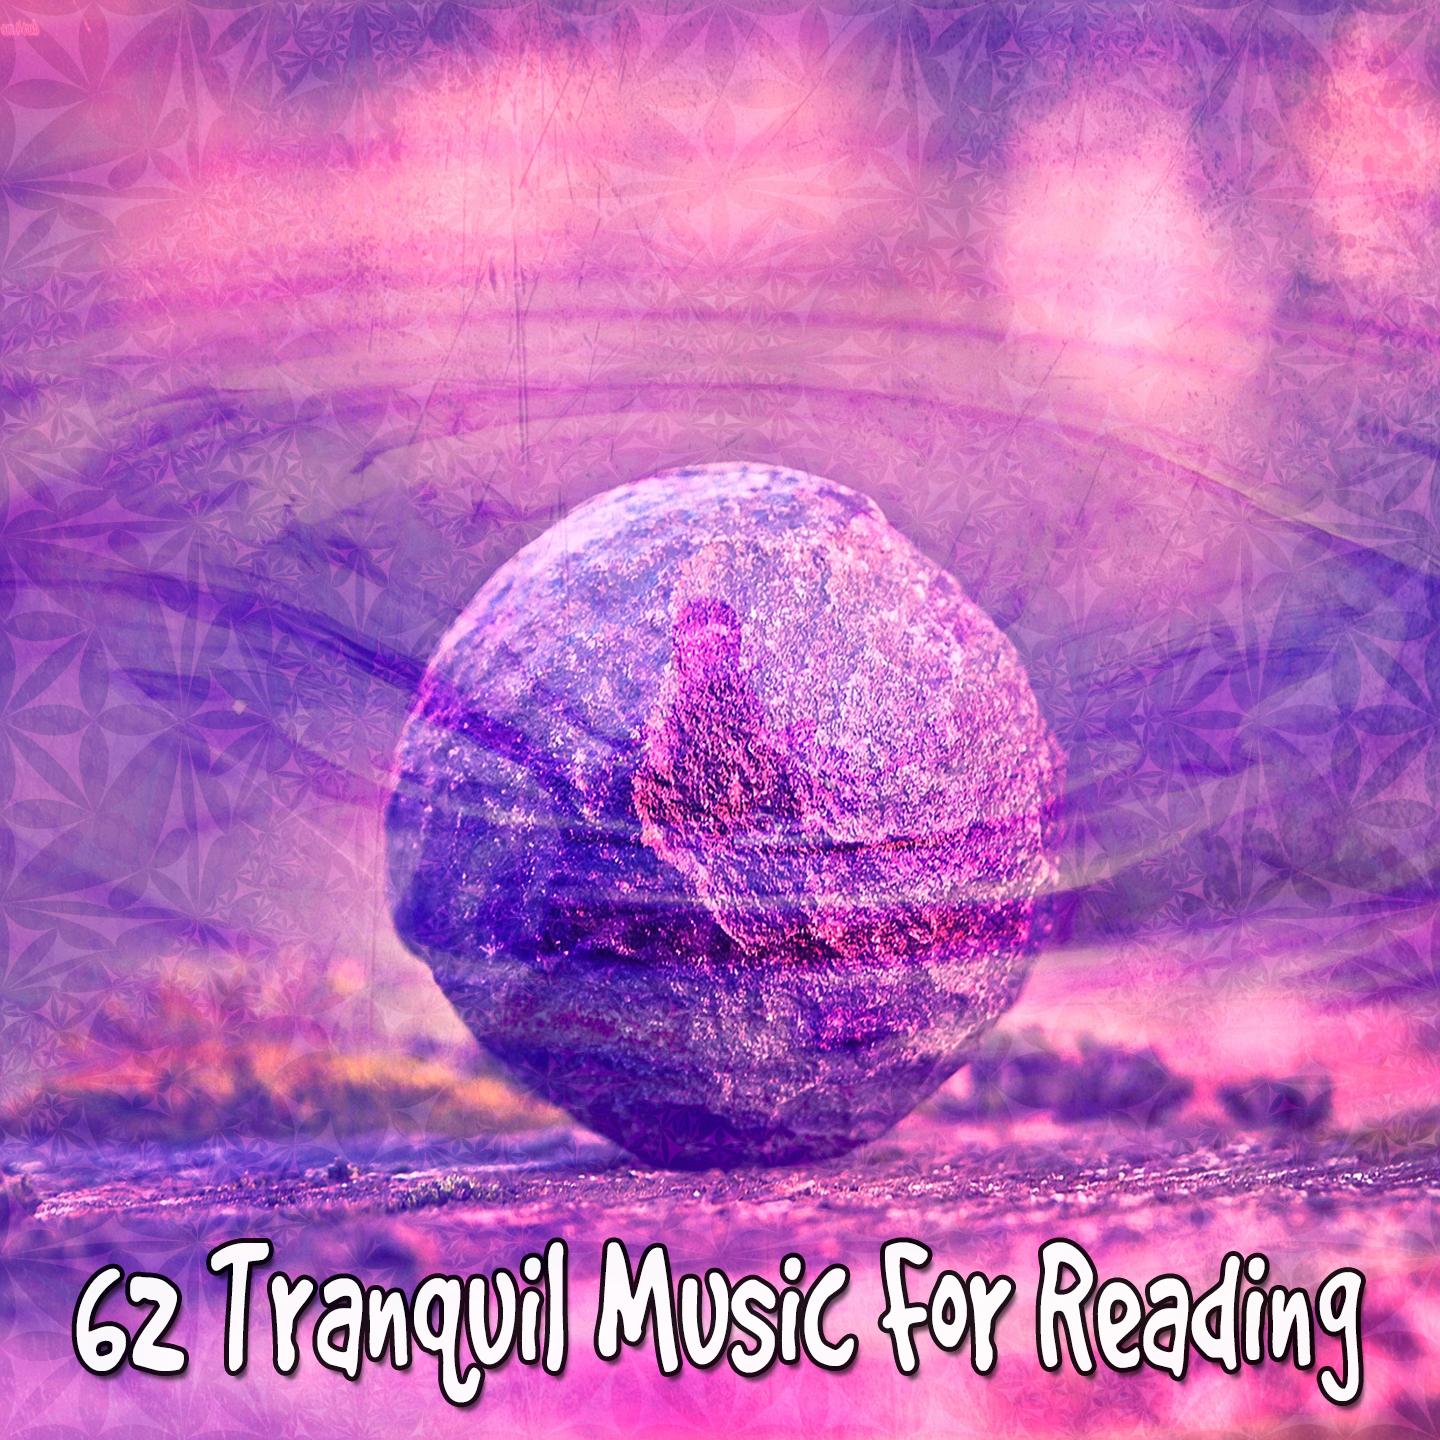 62 Tranquil Music For Reading